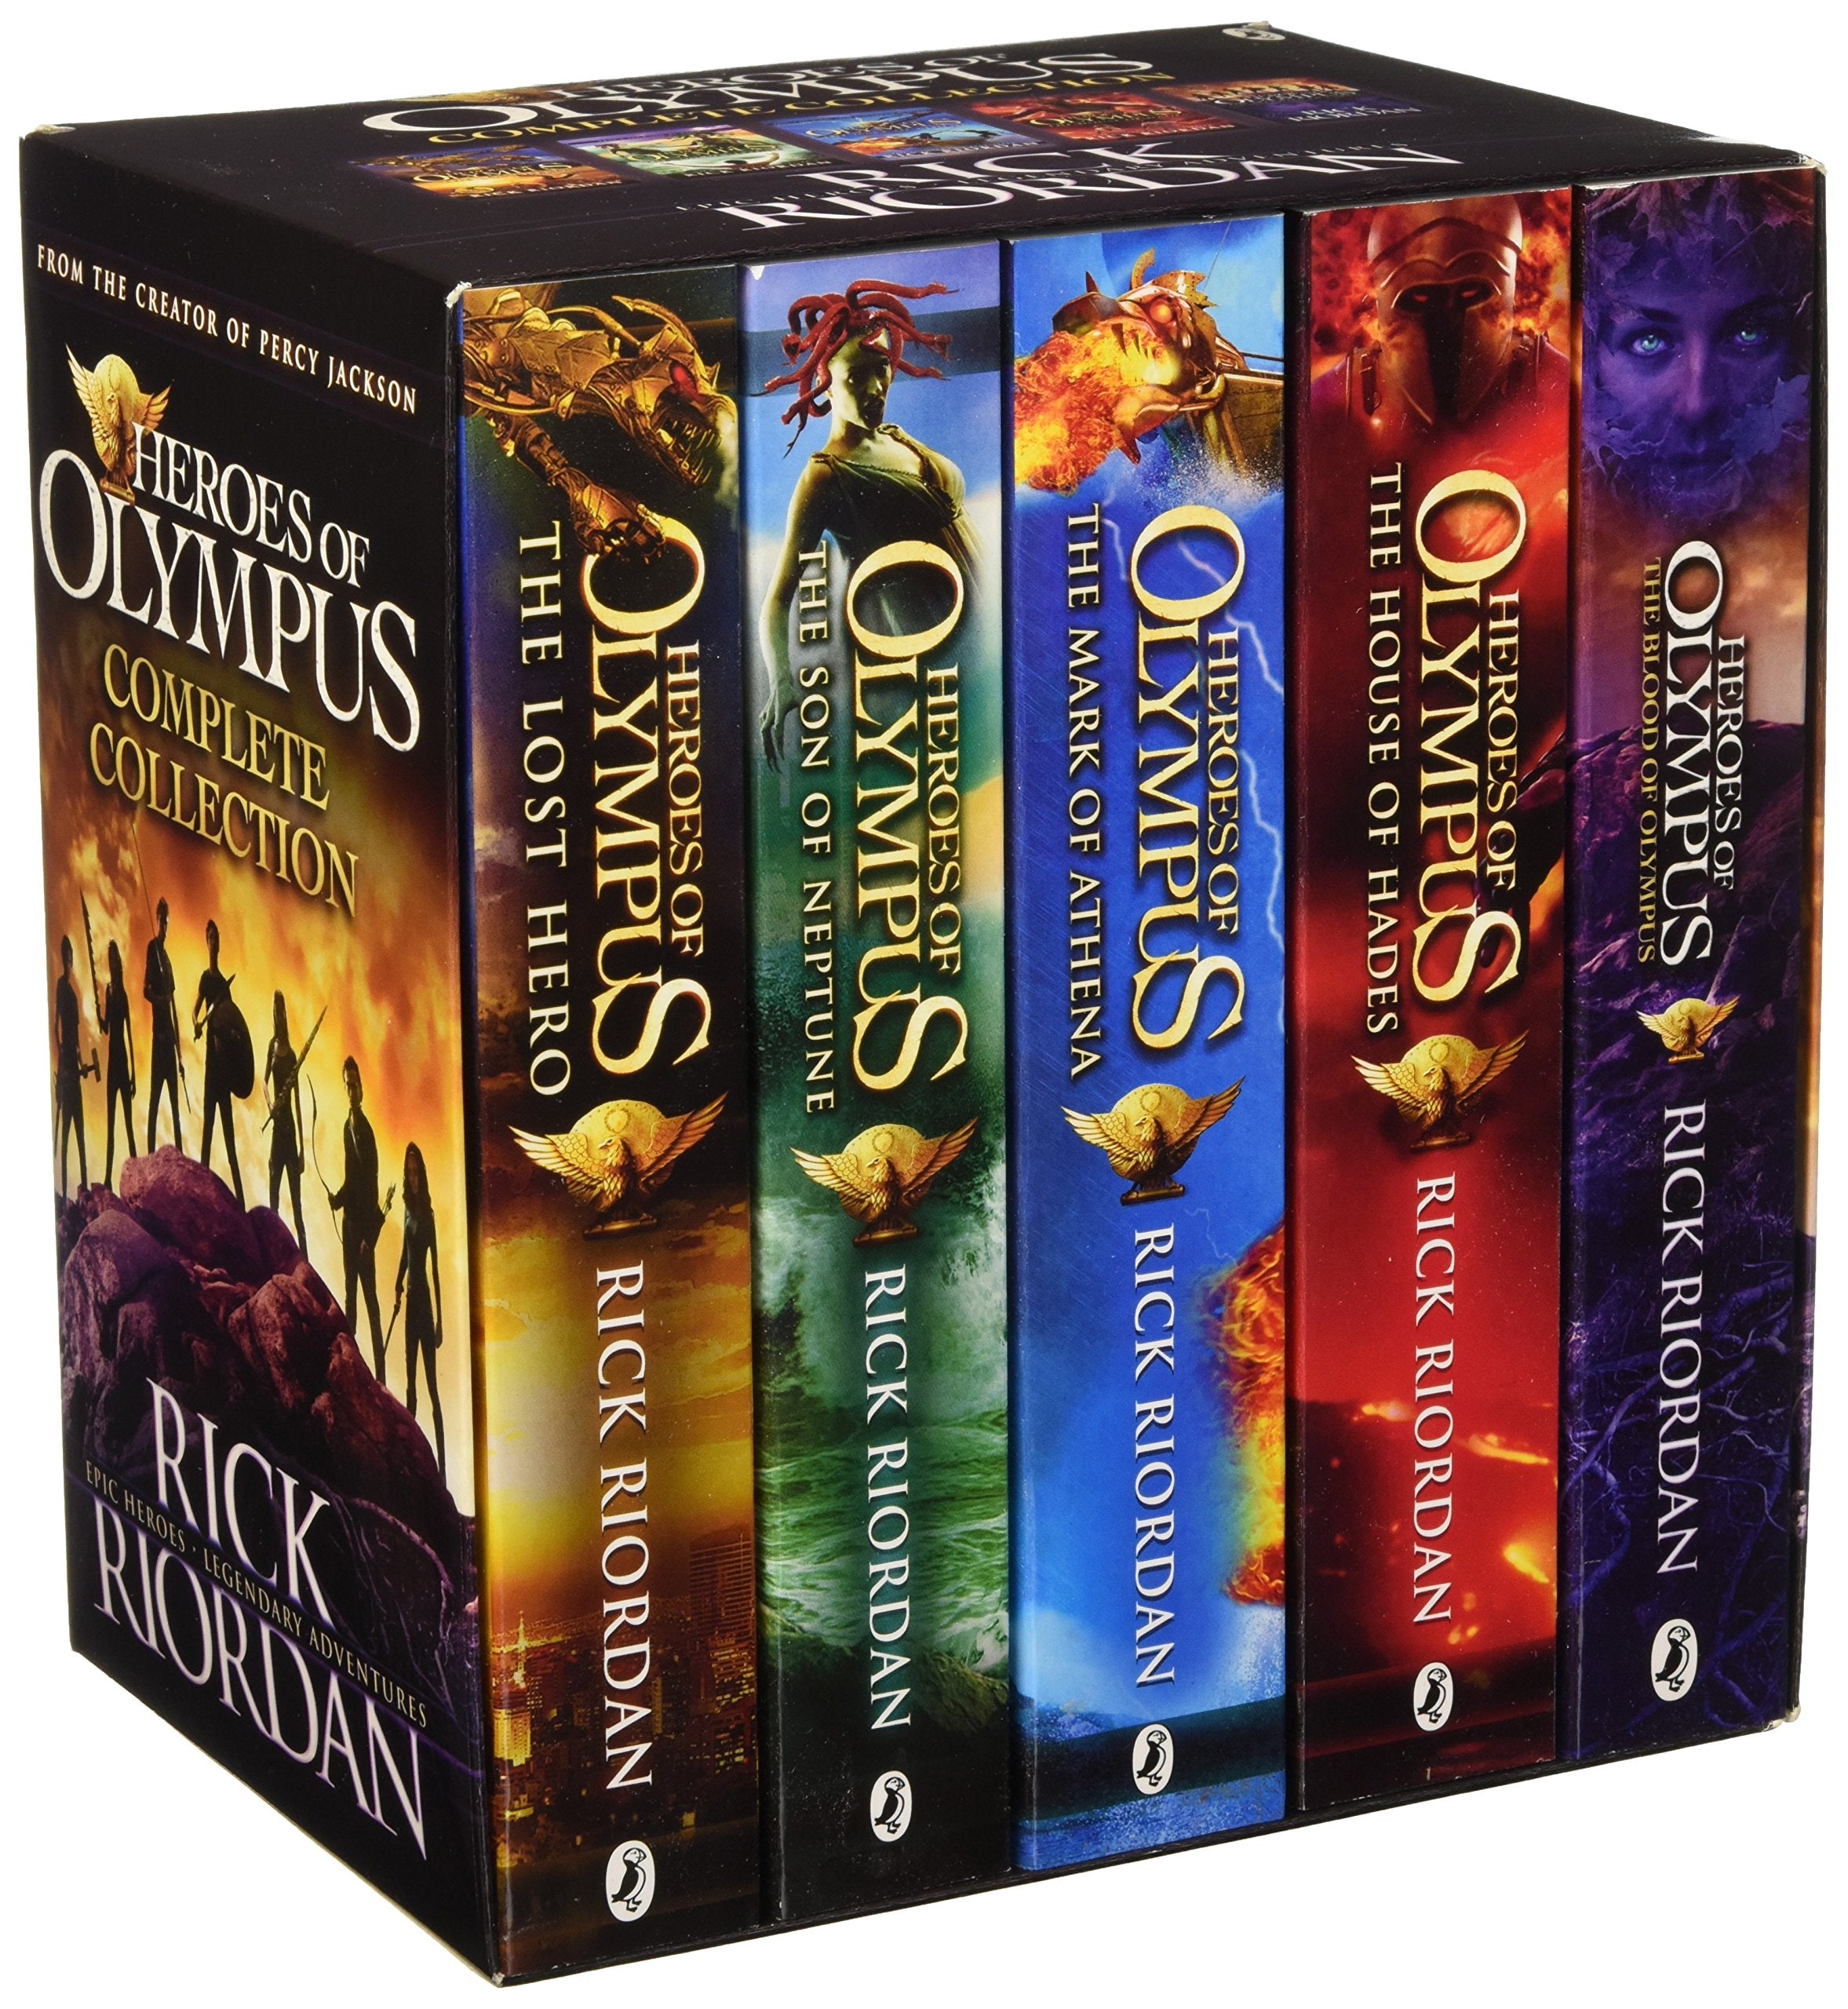 The Heroes Of Olympus - The Complete Series